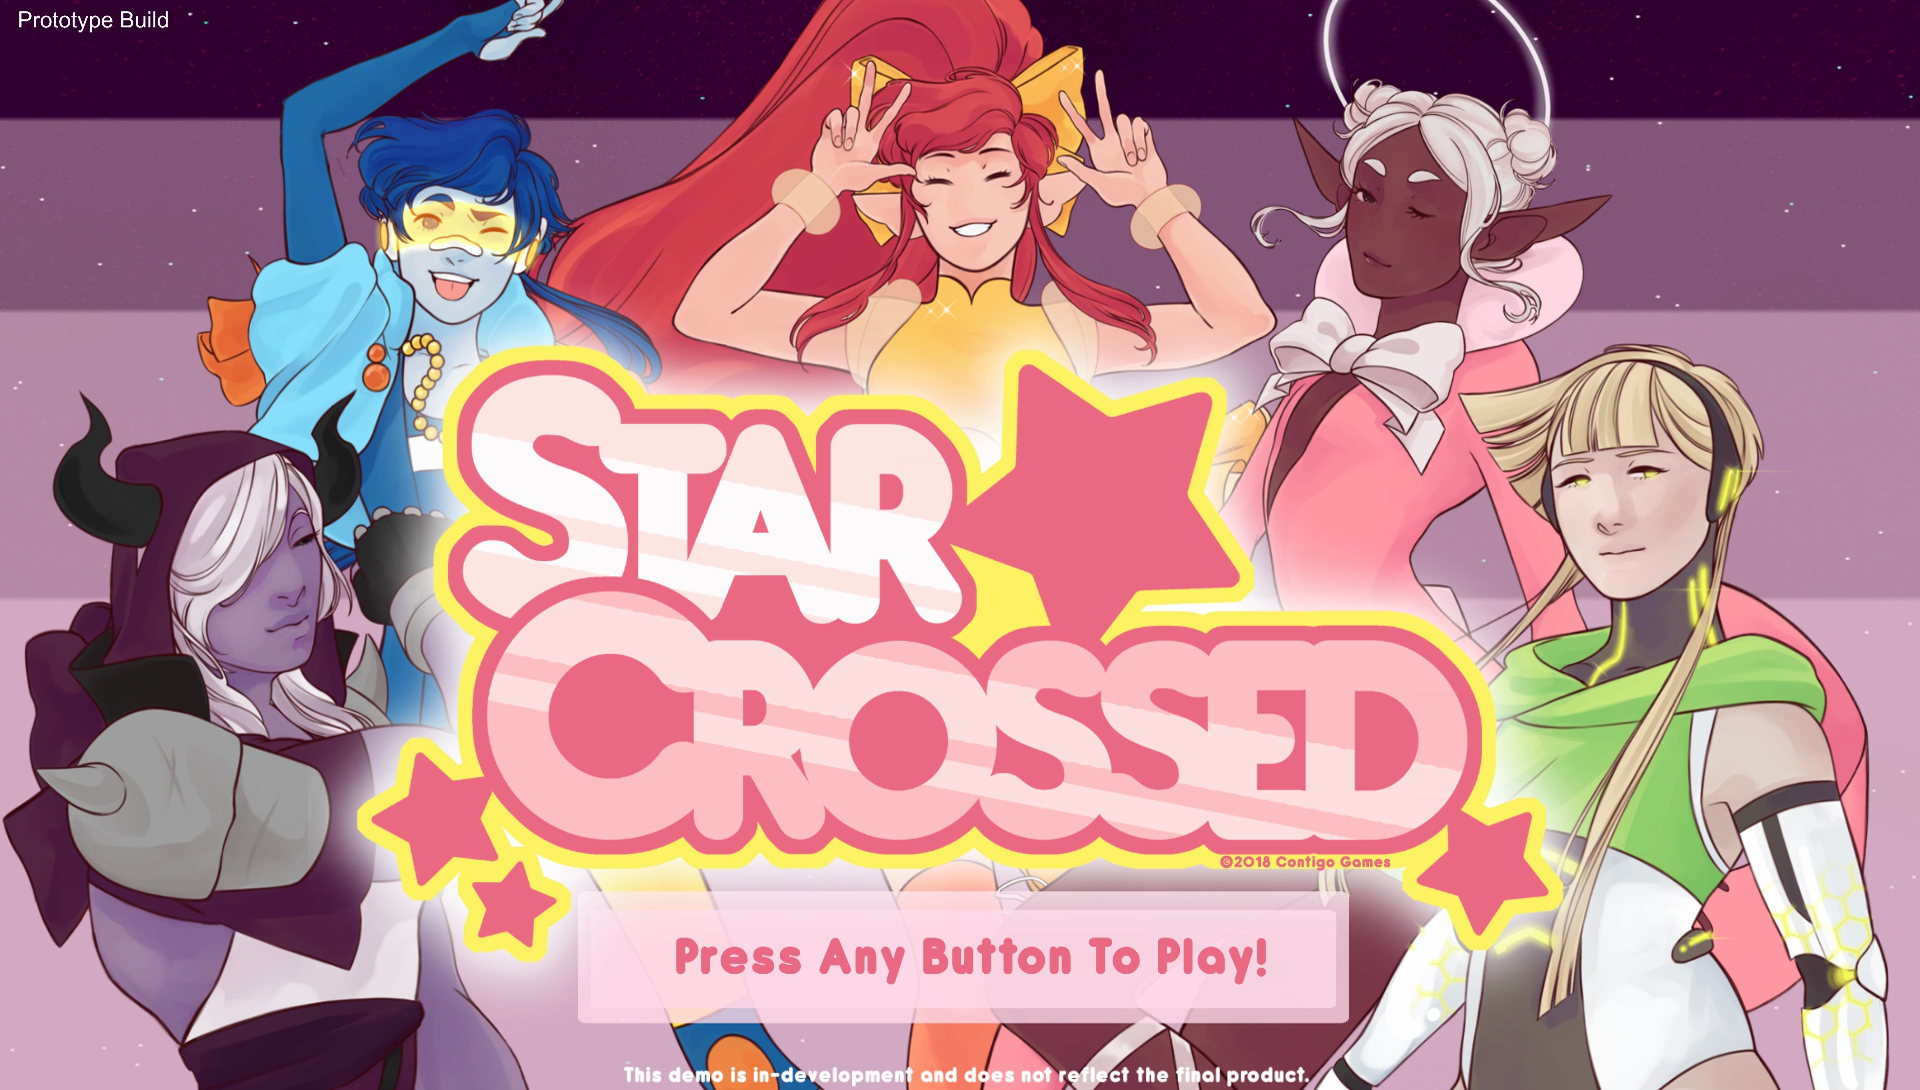 StarCrossed is an action arcade game with a magical girl aesthetic and a co...